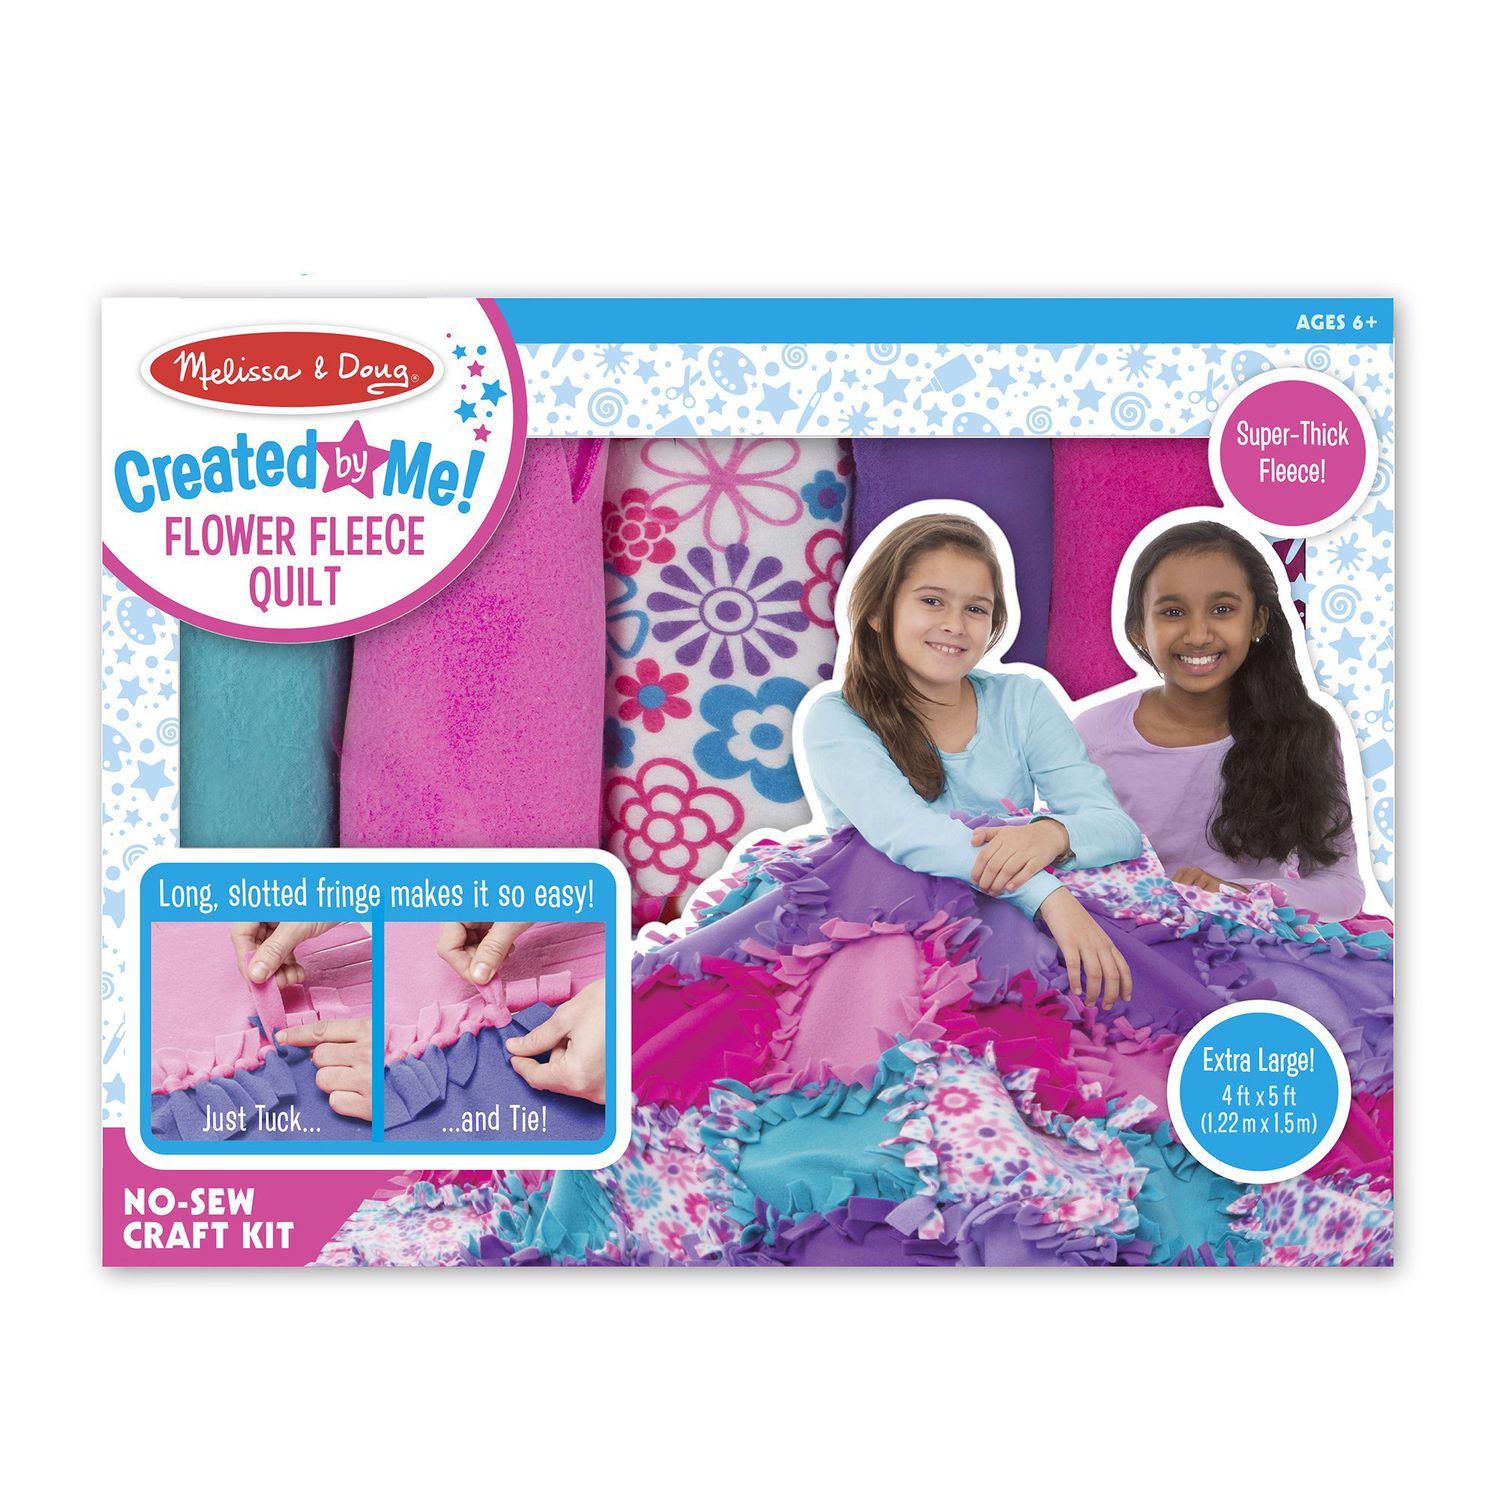 melissa and doug quilt kit